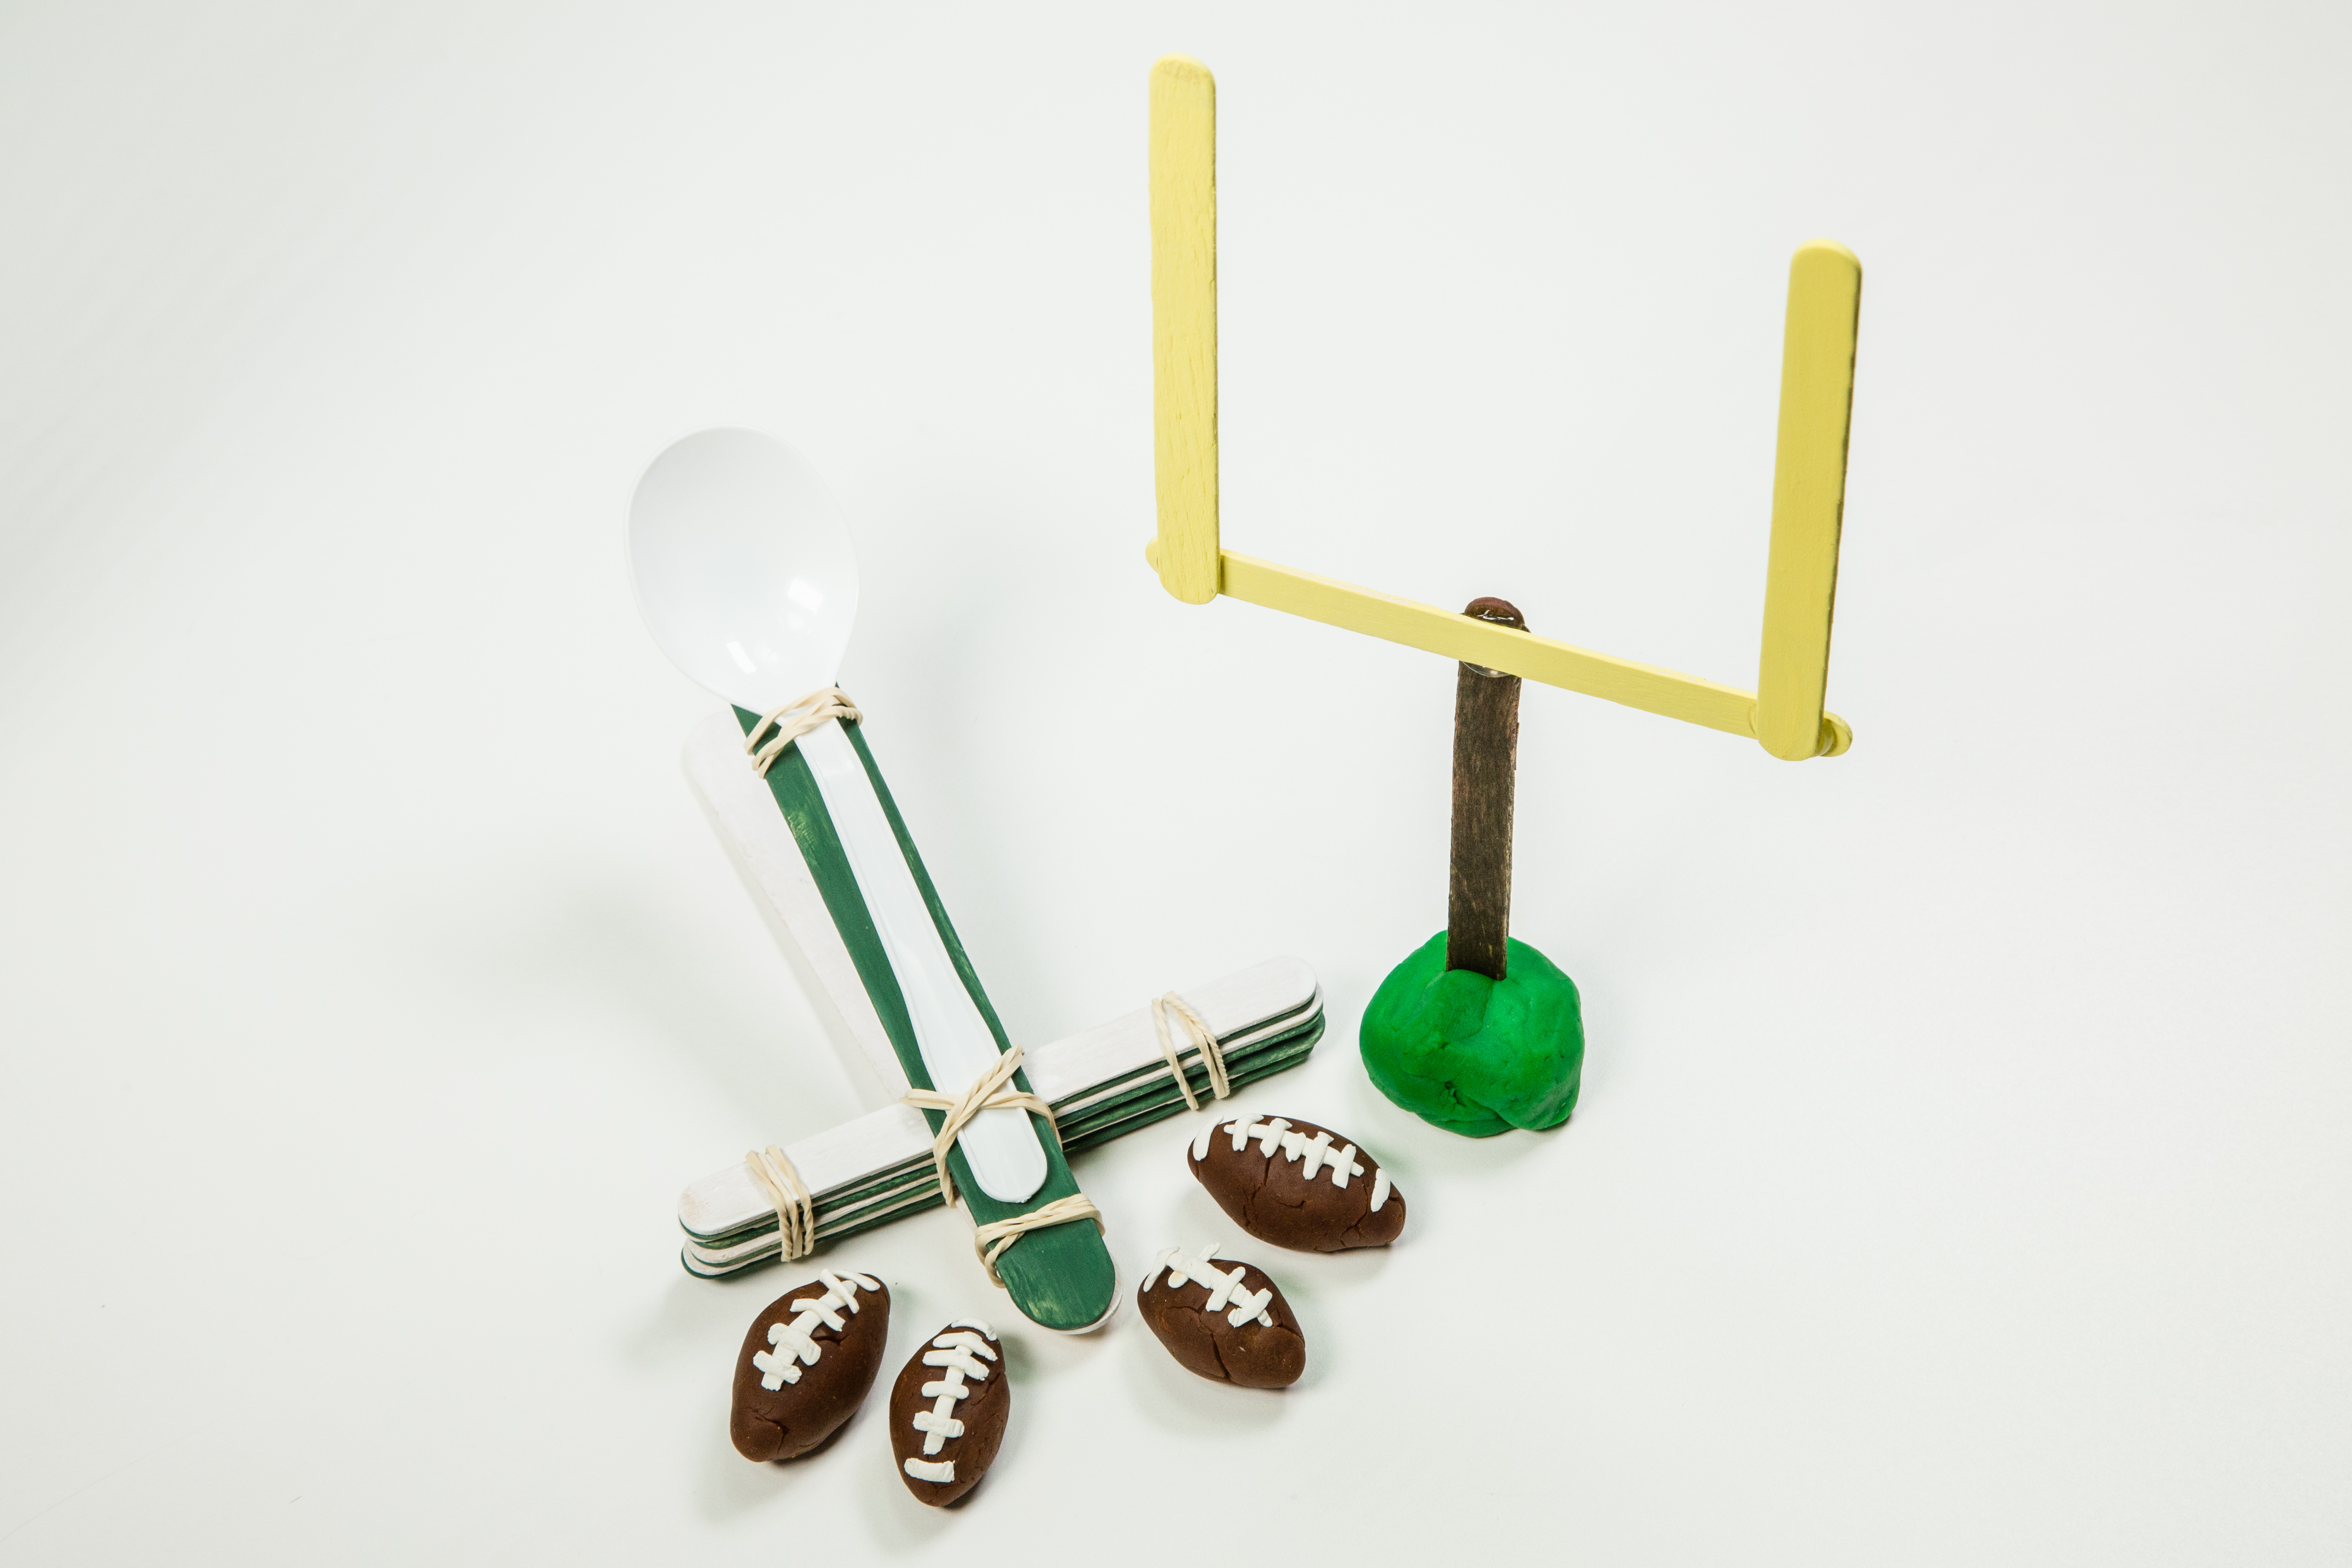 goal post and catapult made out of wooden craft sticks